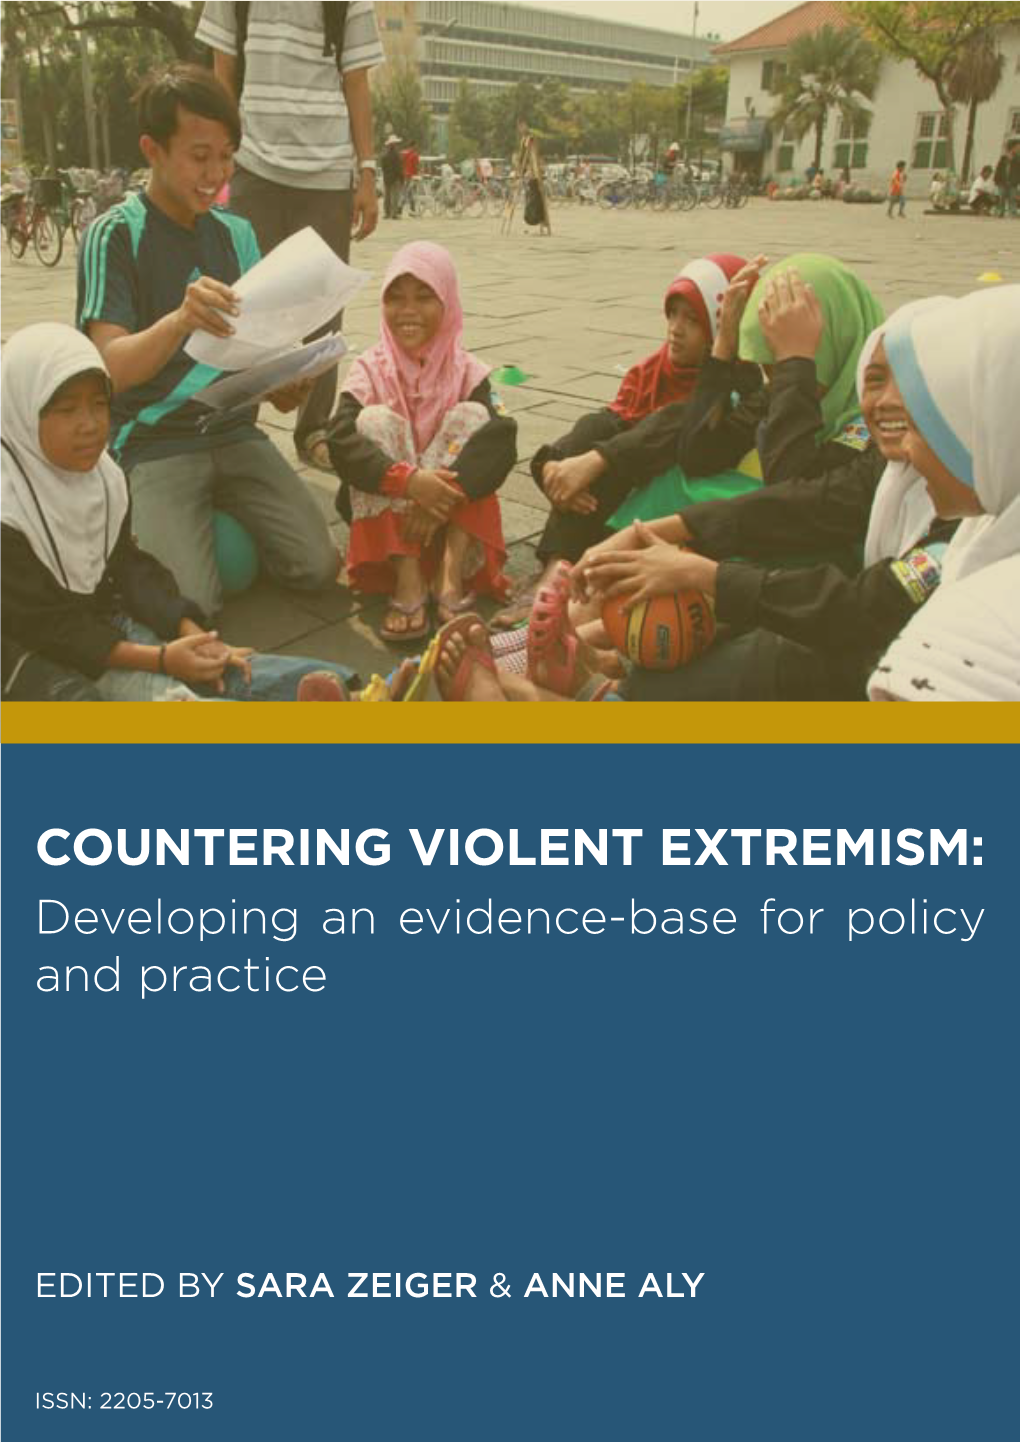 COUNTERING VIOLENT EXTREMISM: Developing an Evidence-Base for Policy and Practice